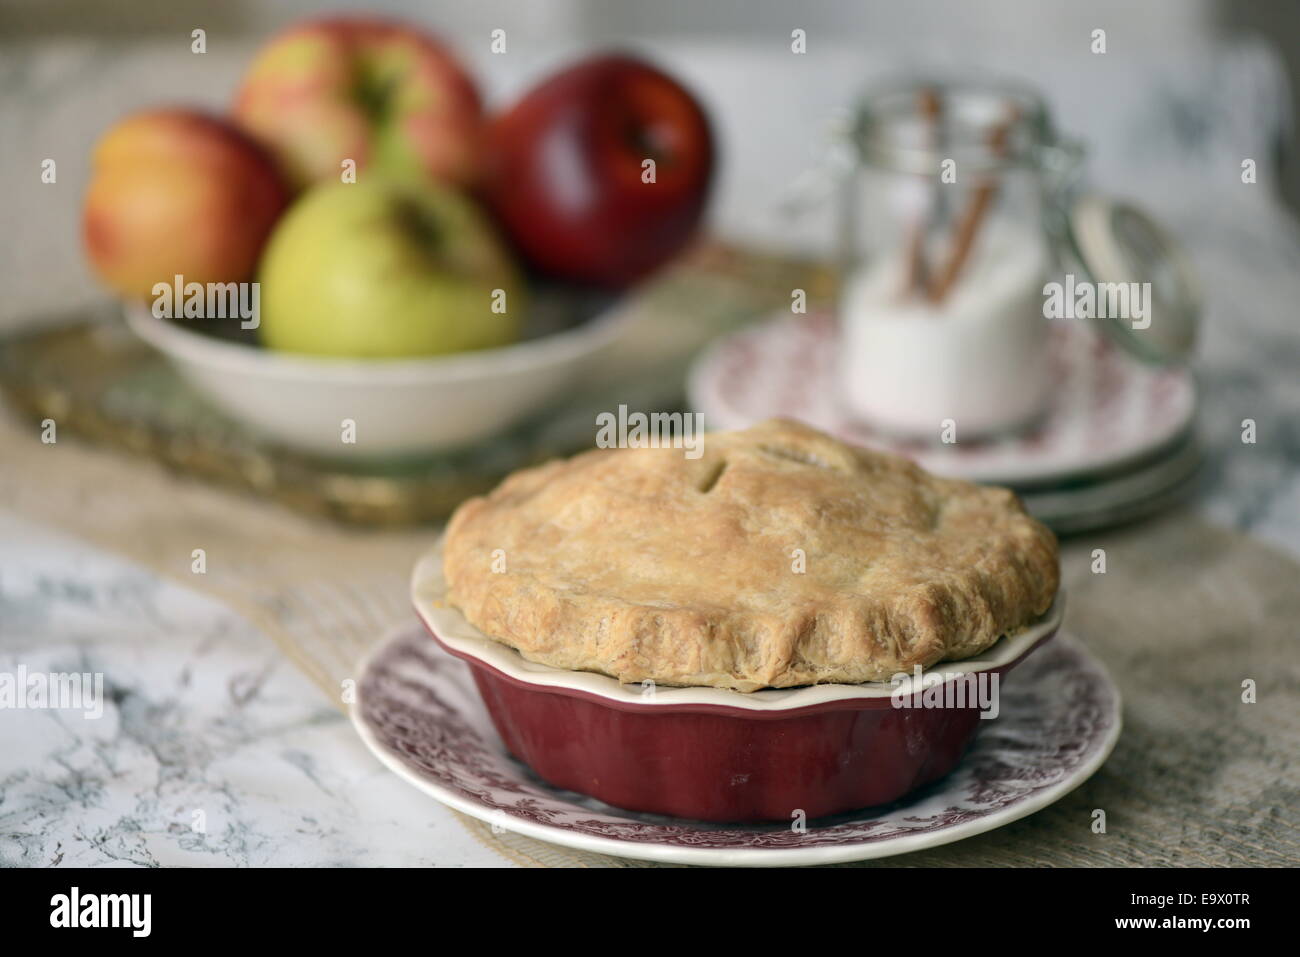 Home baked apple pie with fresh apples and cinnamon sugar in the background. Stock Photo